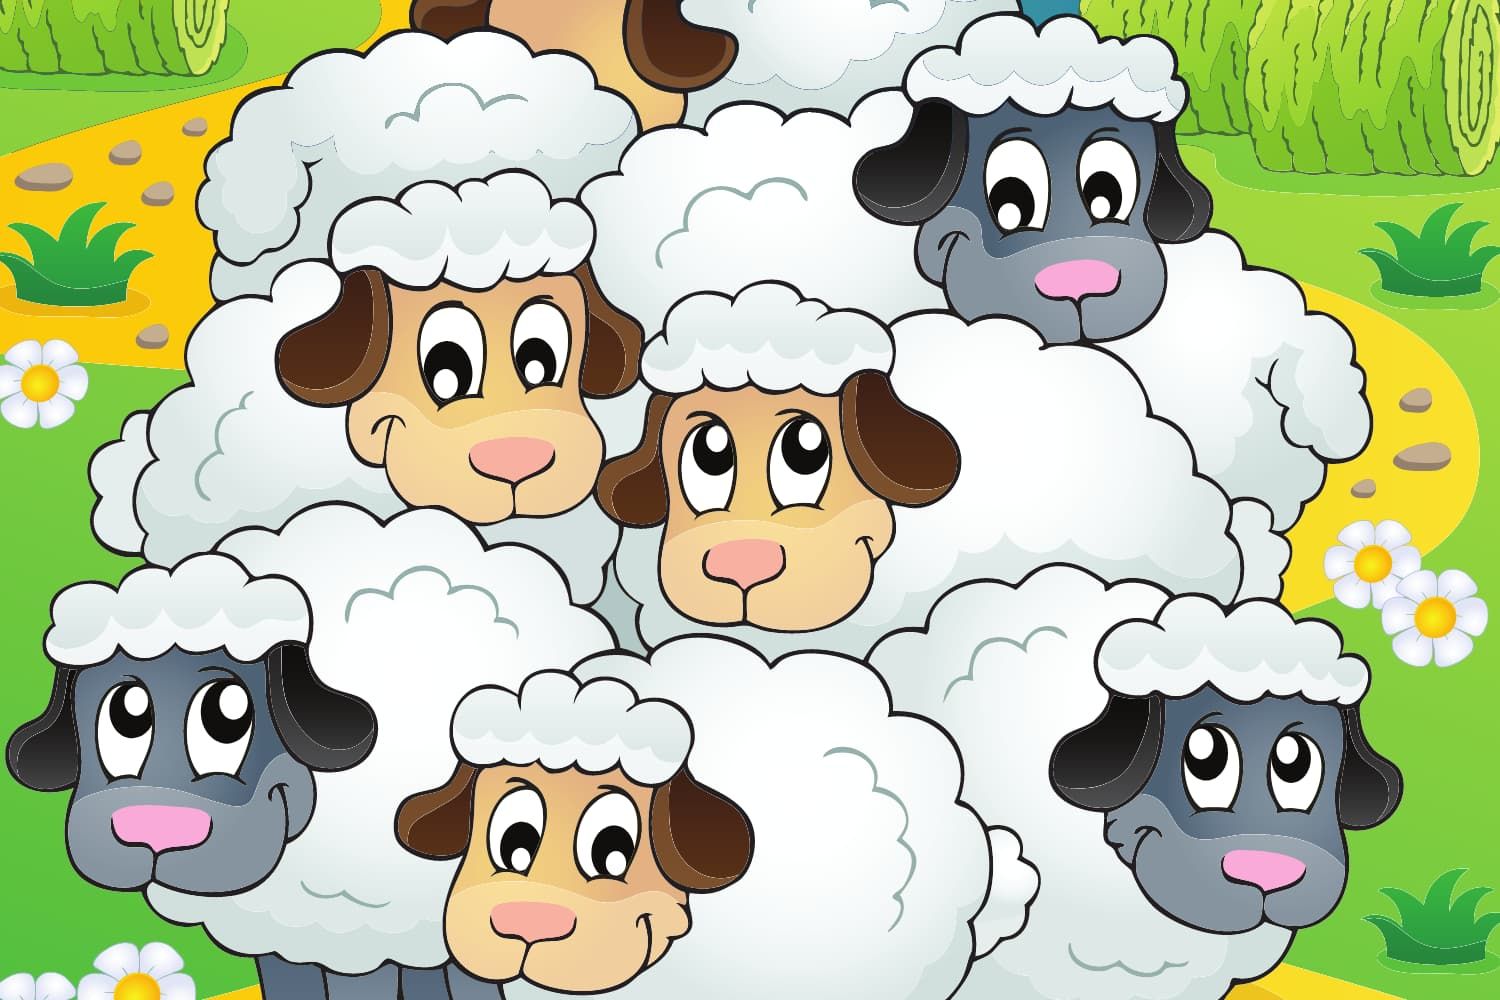 Game%20-%20NT%20Parable%20of%20the%20lost%20sheep%20-%20Count%20the%20sheep-b72376df Matthew